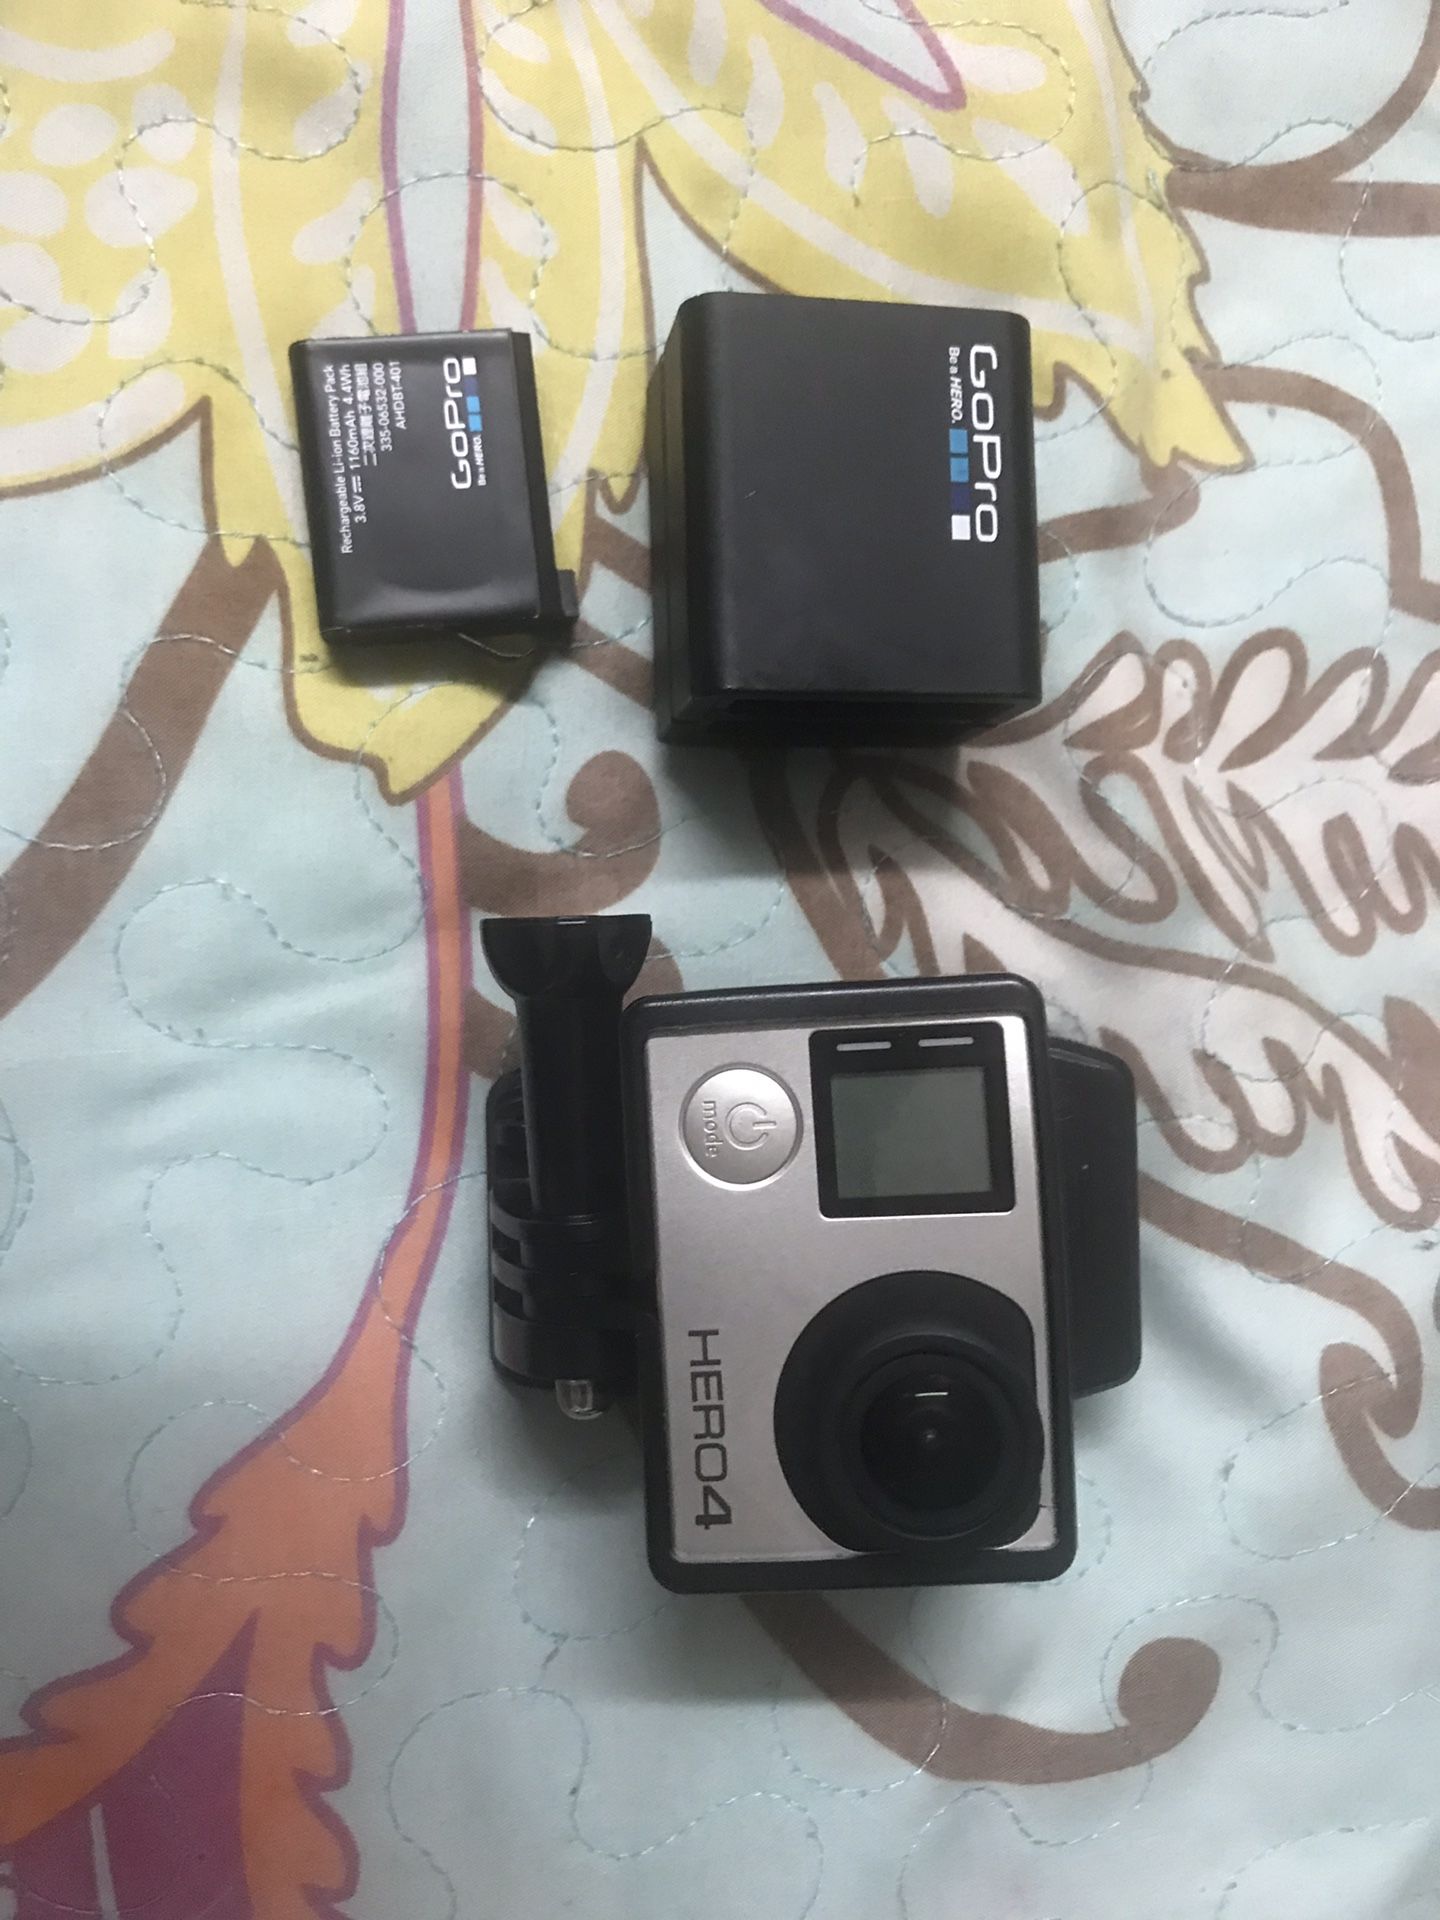 Gopro hero 4 black with extra 2 battery with accessories with a bag